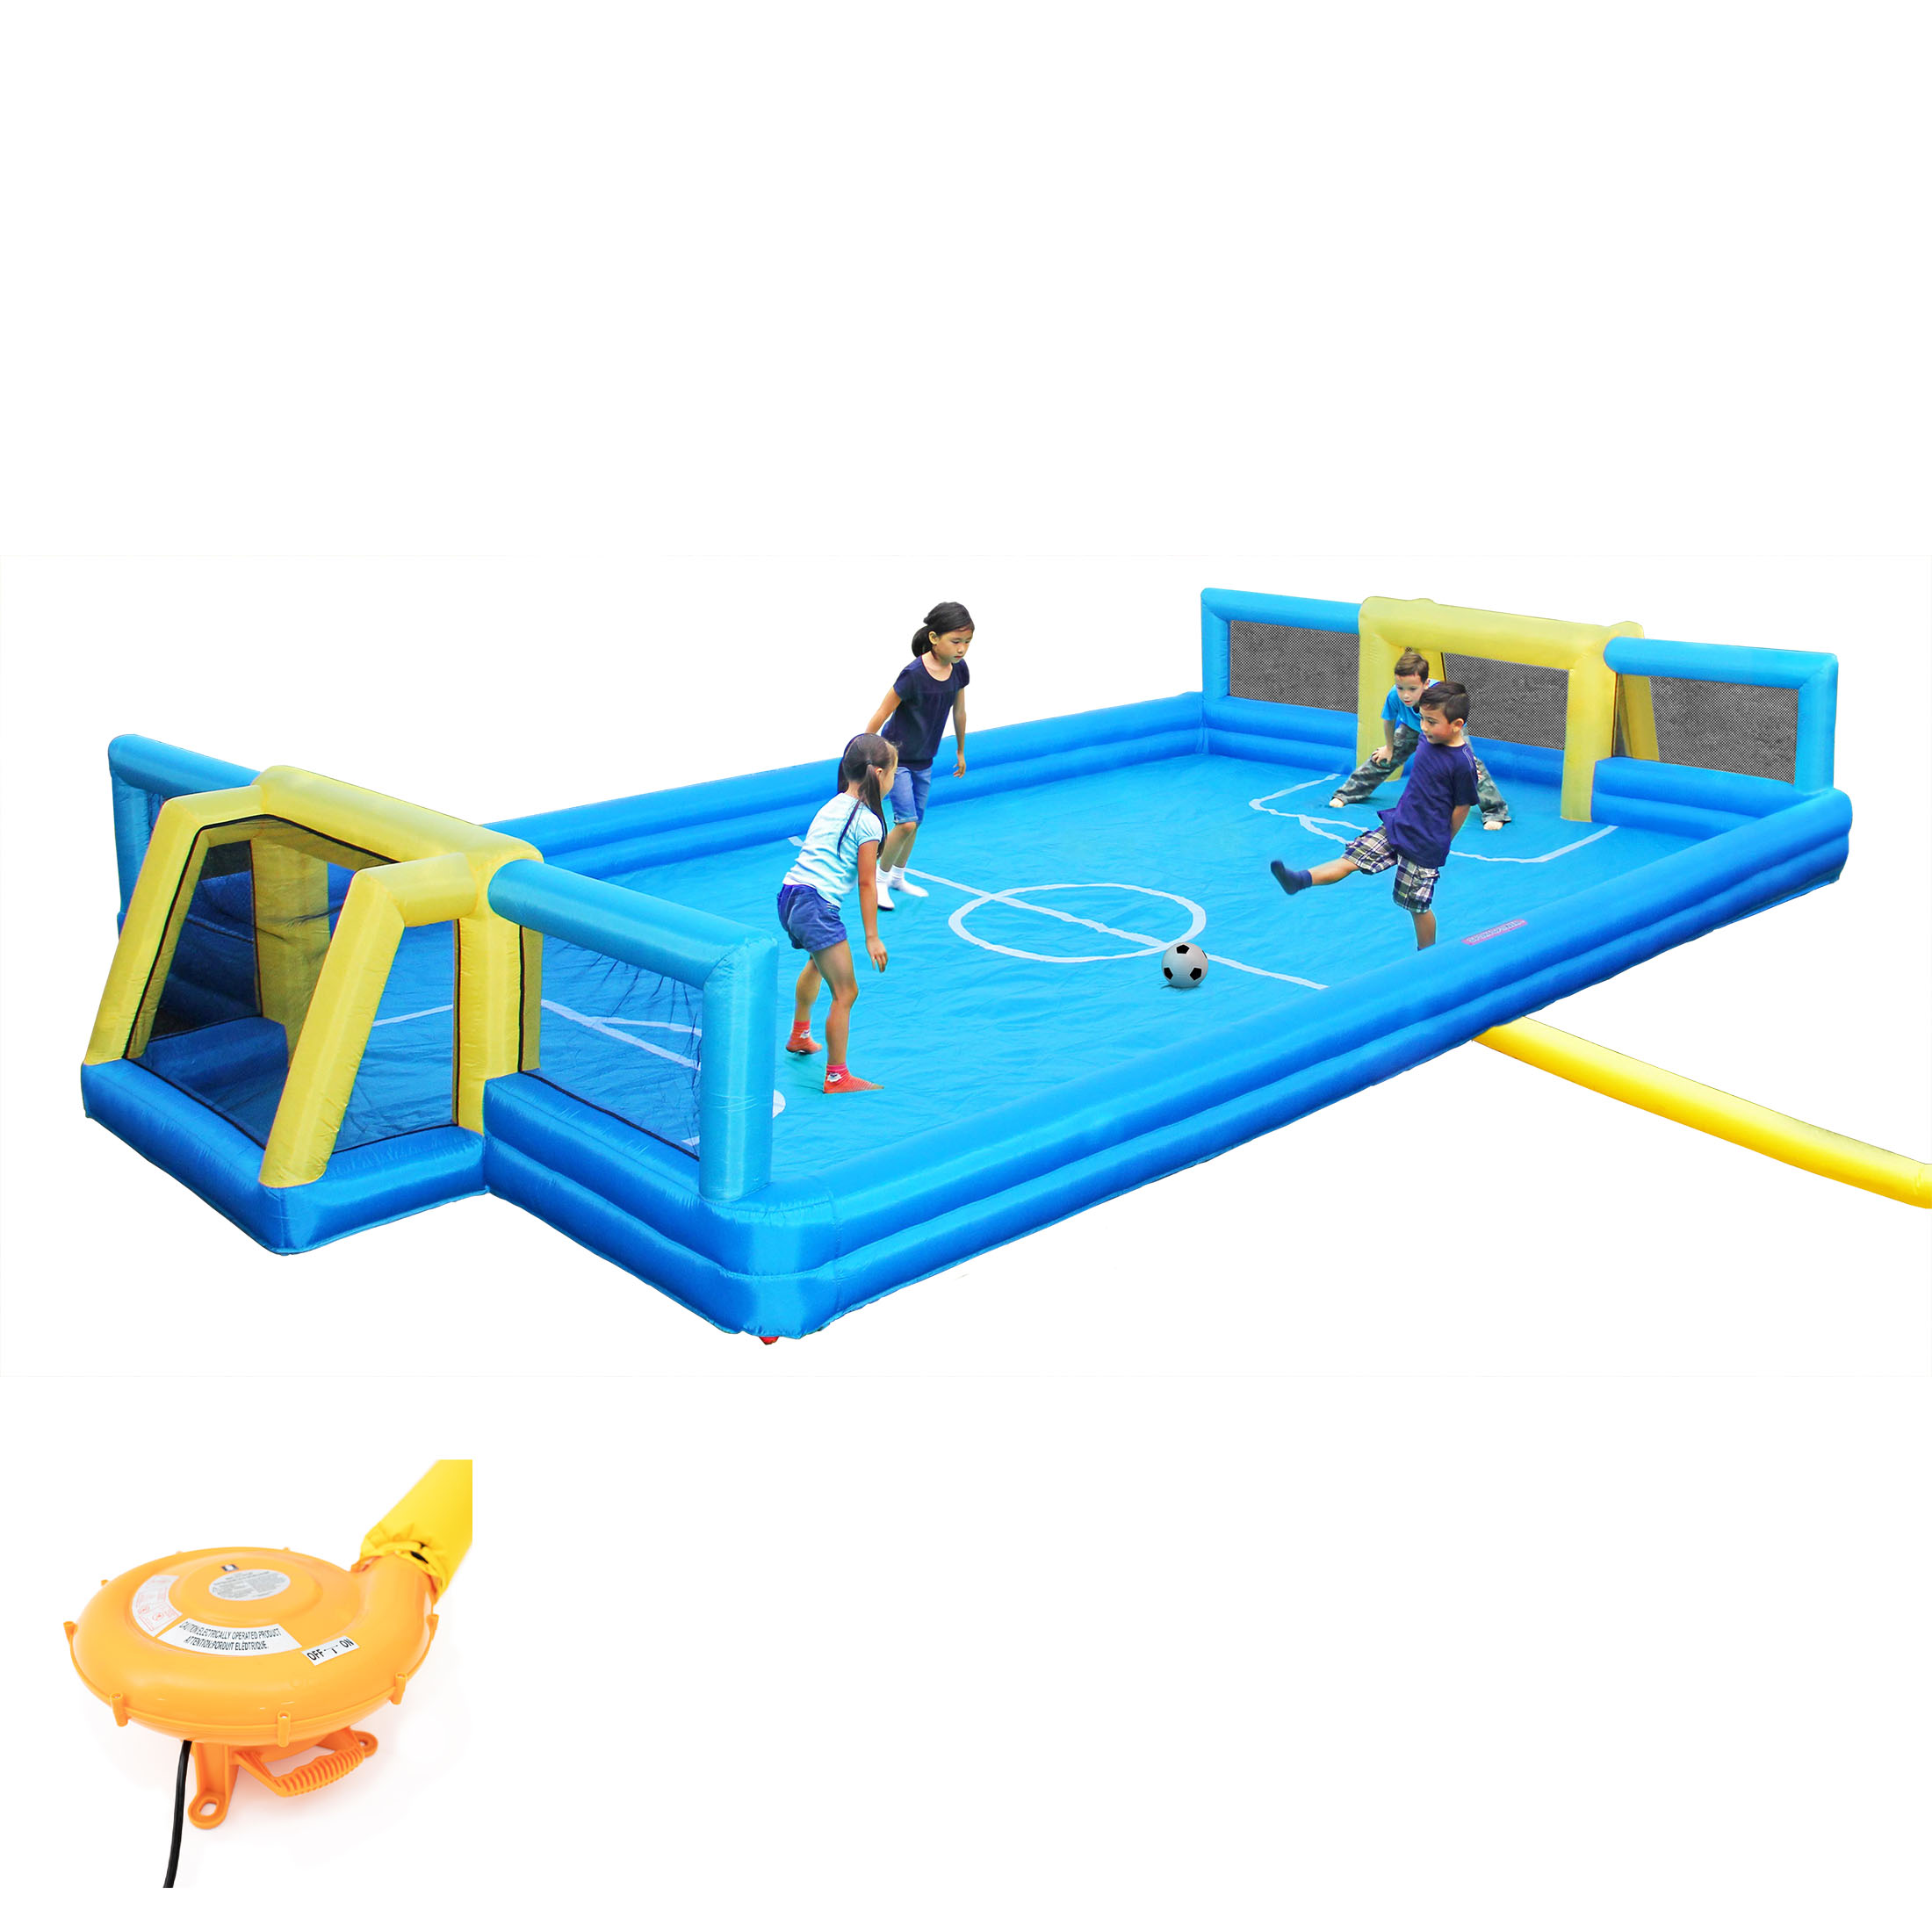 Sportspower Inflatable Soccer Field with 2 Soccer Goals and with Lifetime Warranty on Heavy Duty Blower - image 1 of 6